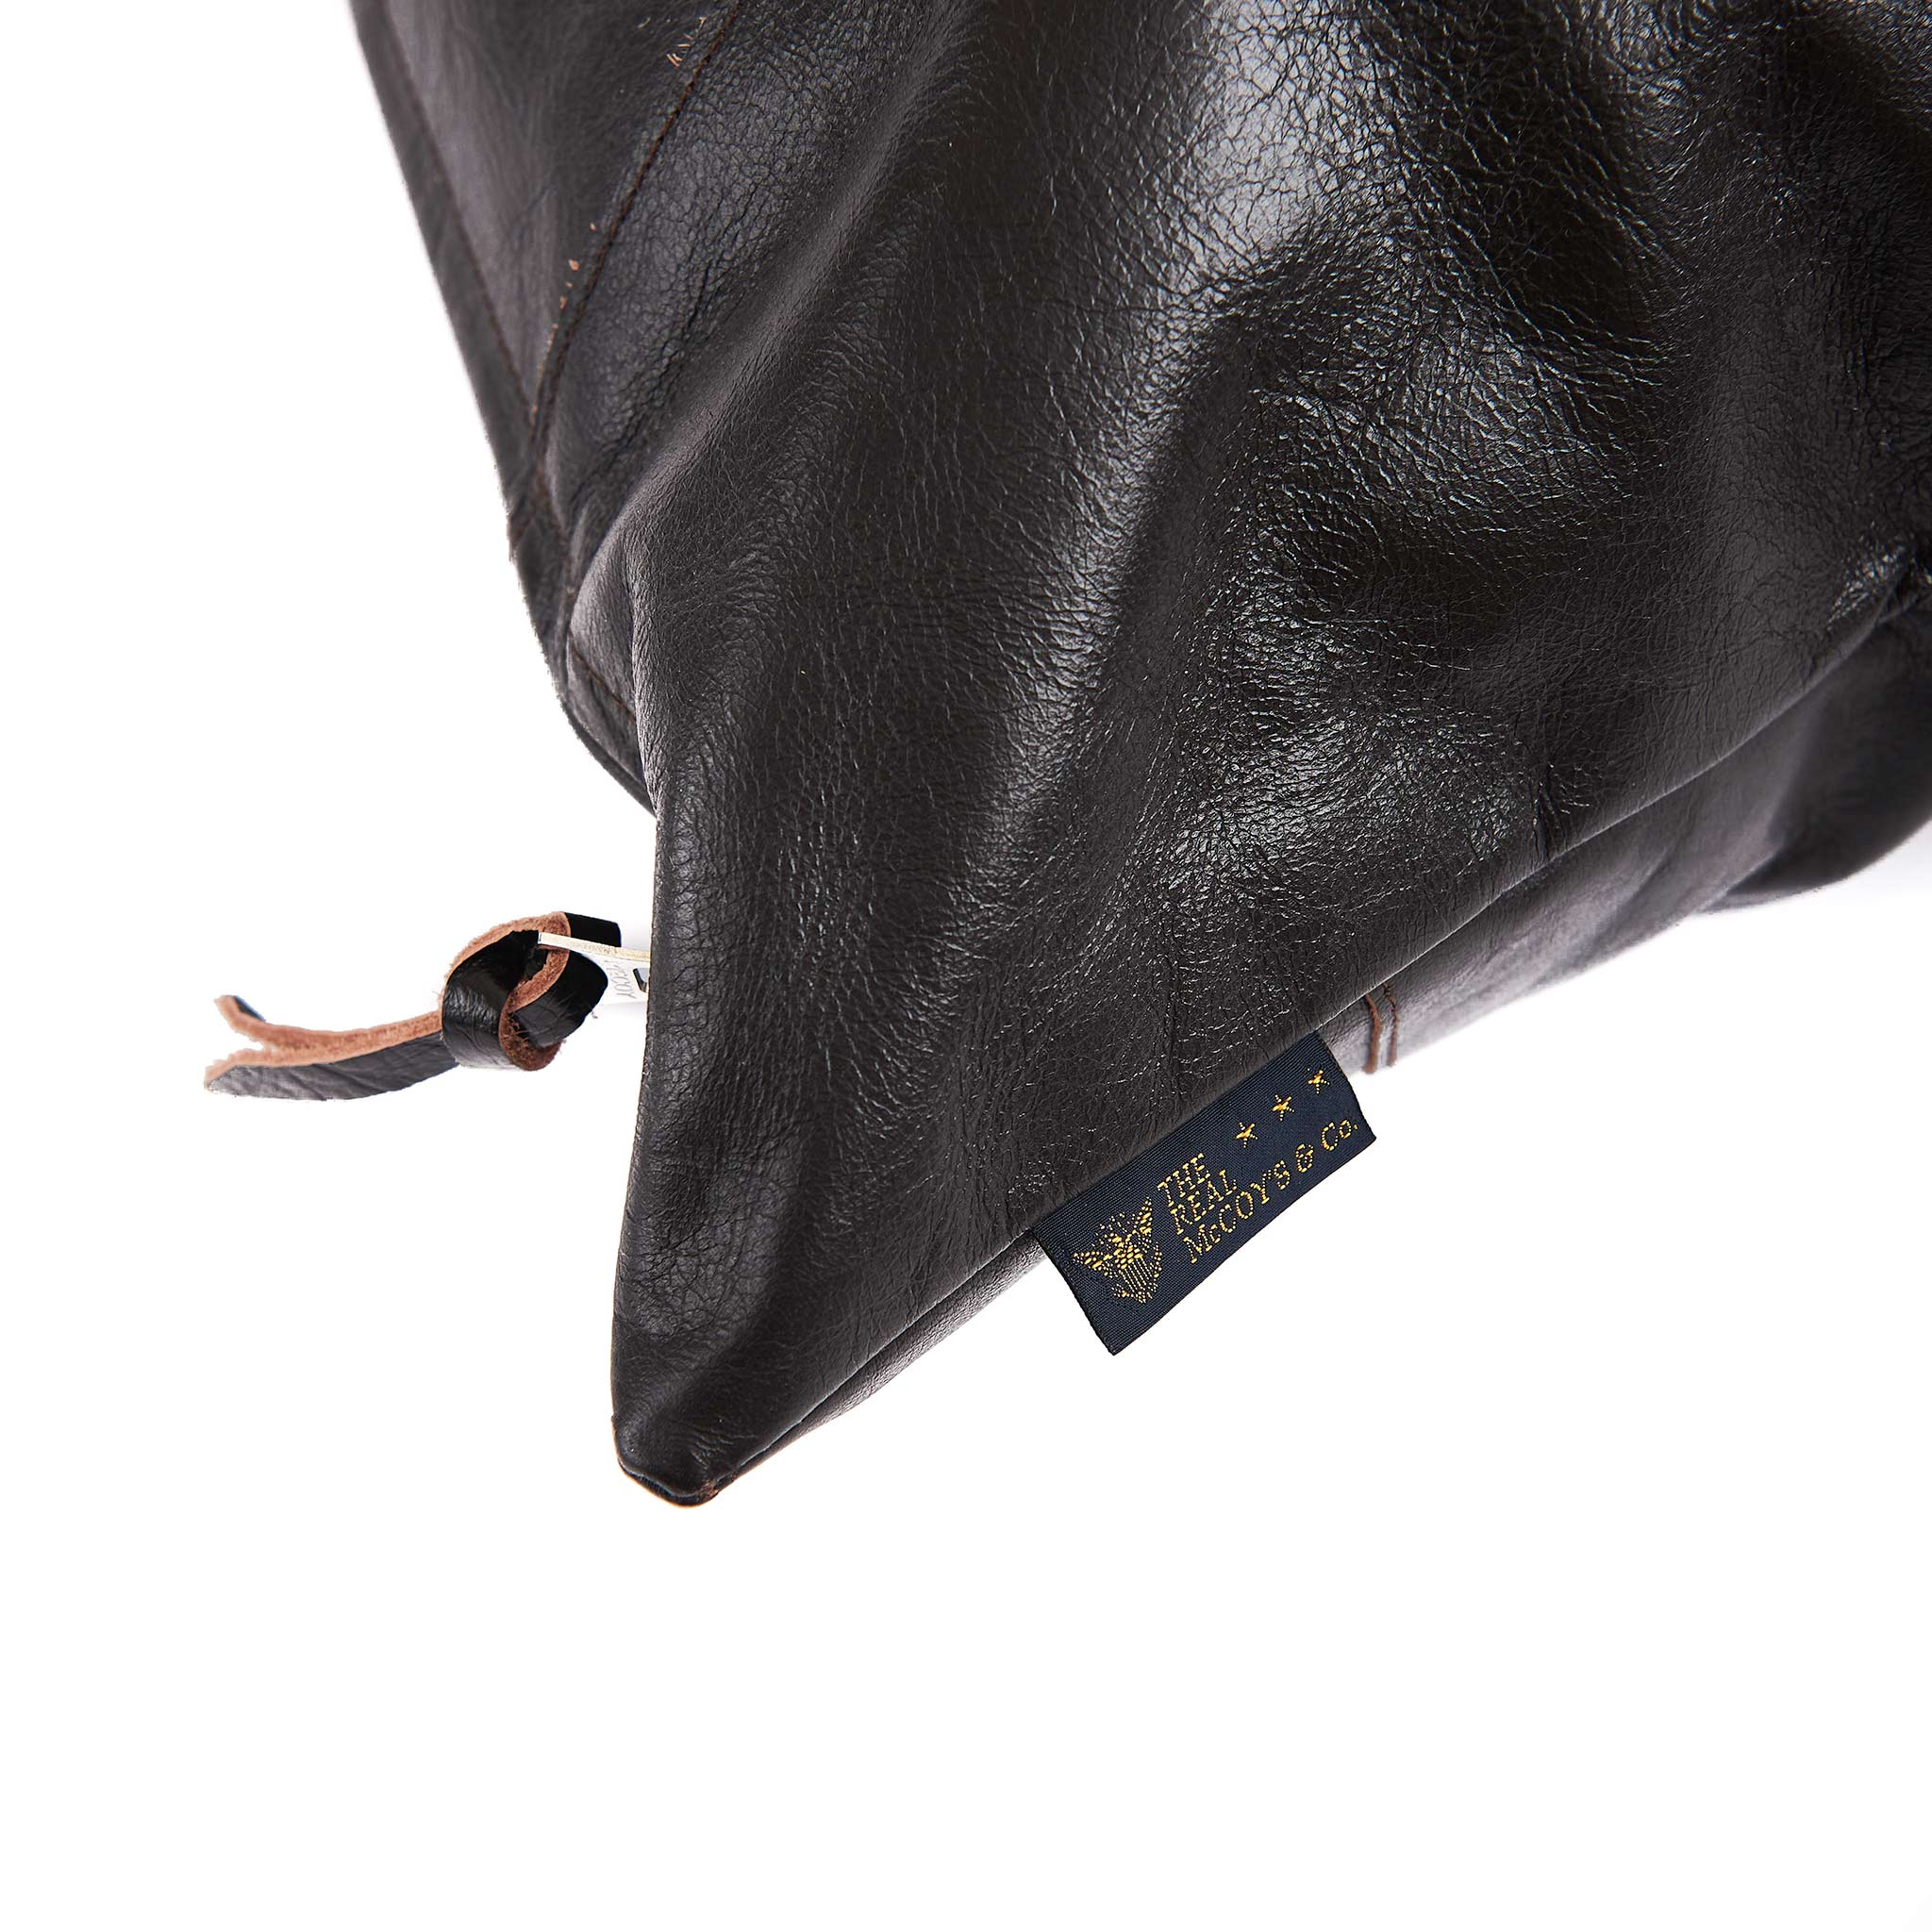 The Real McCoy's MW18101 Horsehide Cushion (Large) Brown Detail